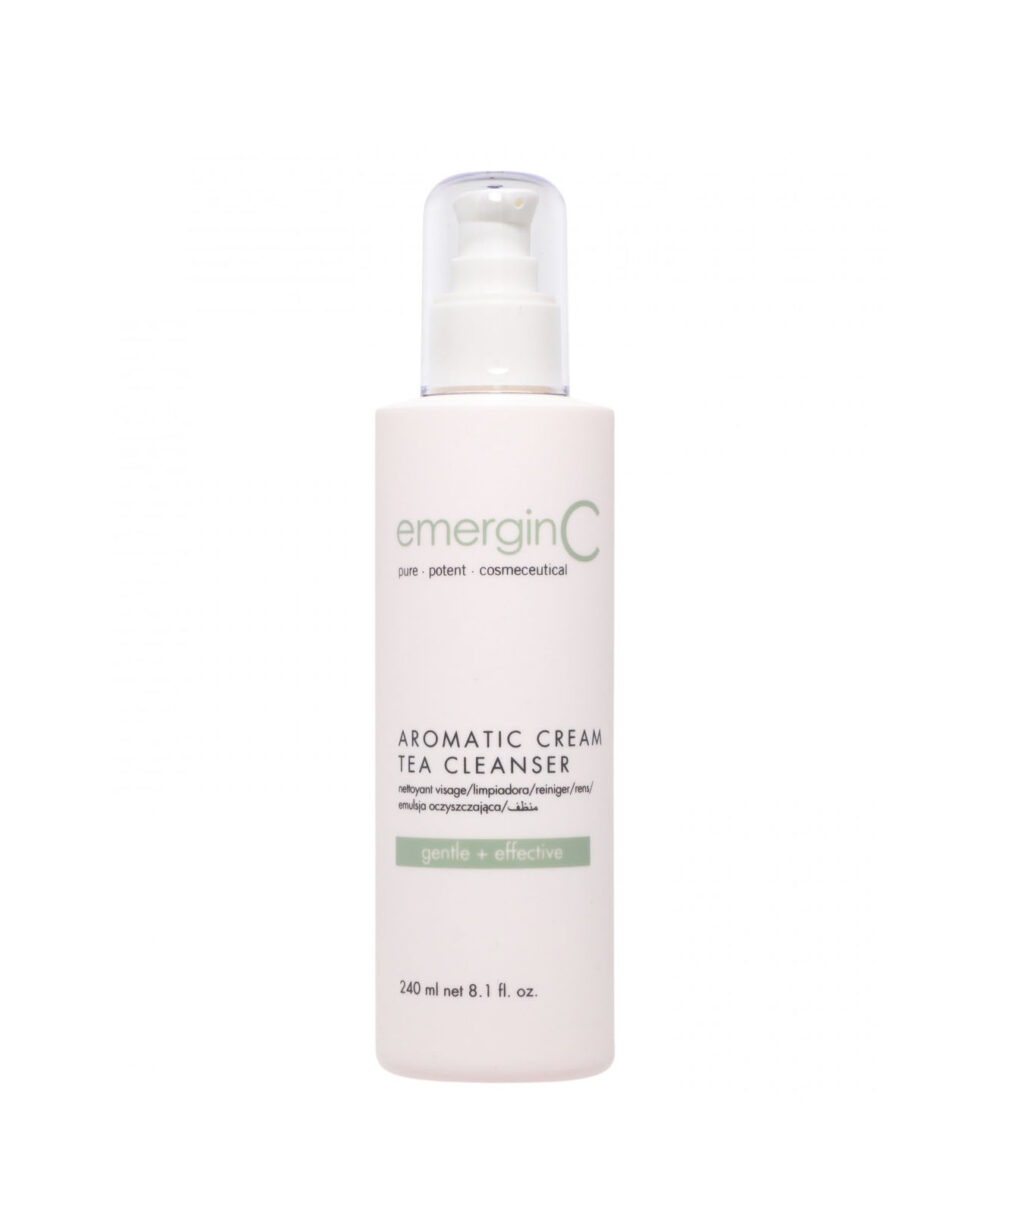 A pump bottle of Birchrose + Co Aromatic Cream Tea Cleanser against a white background, highlighting the product's gentle and effective cleansing qualities for skin care.